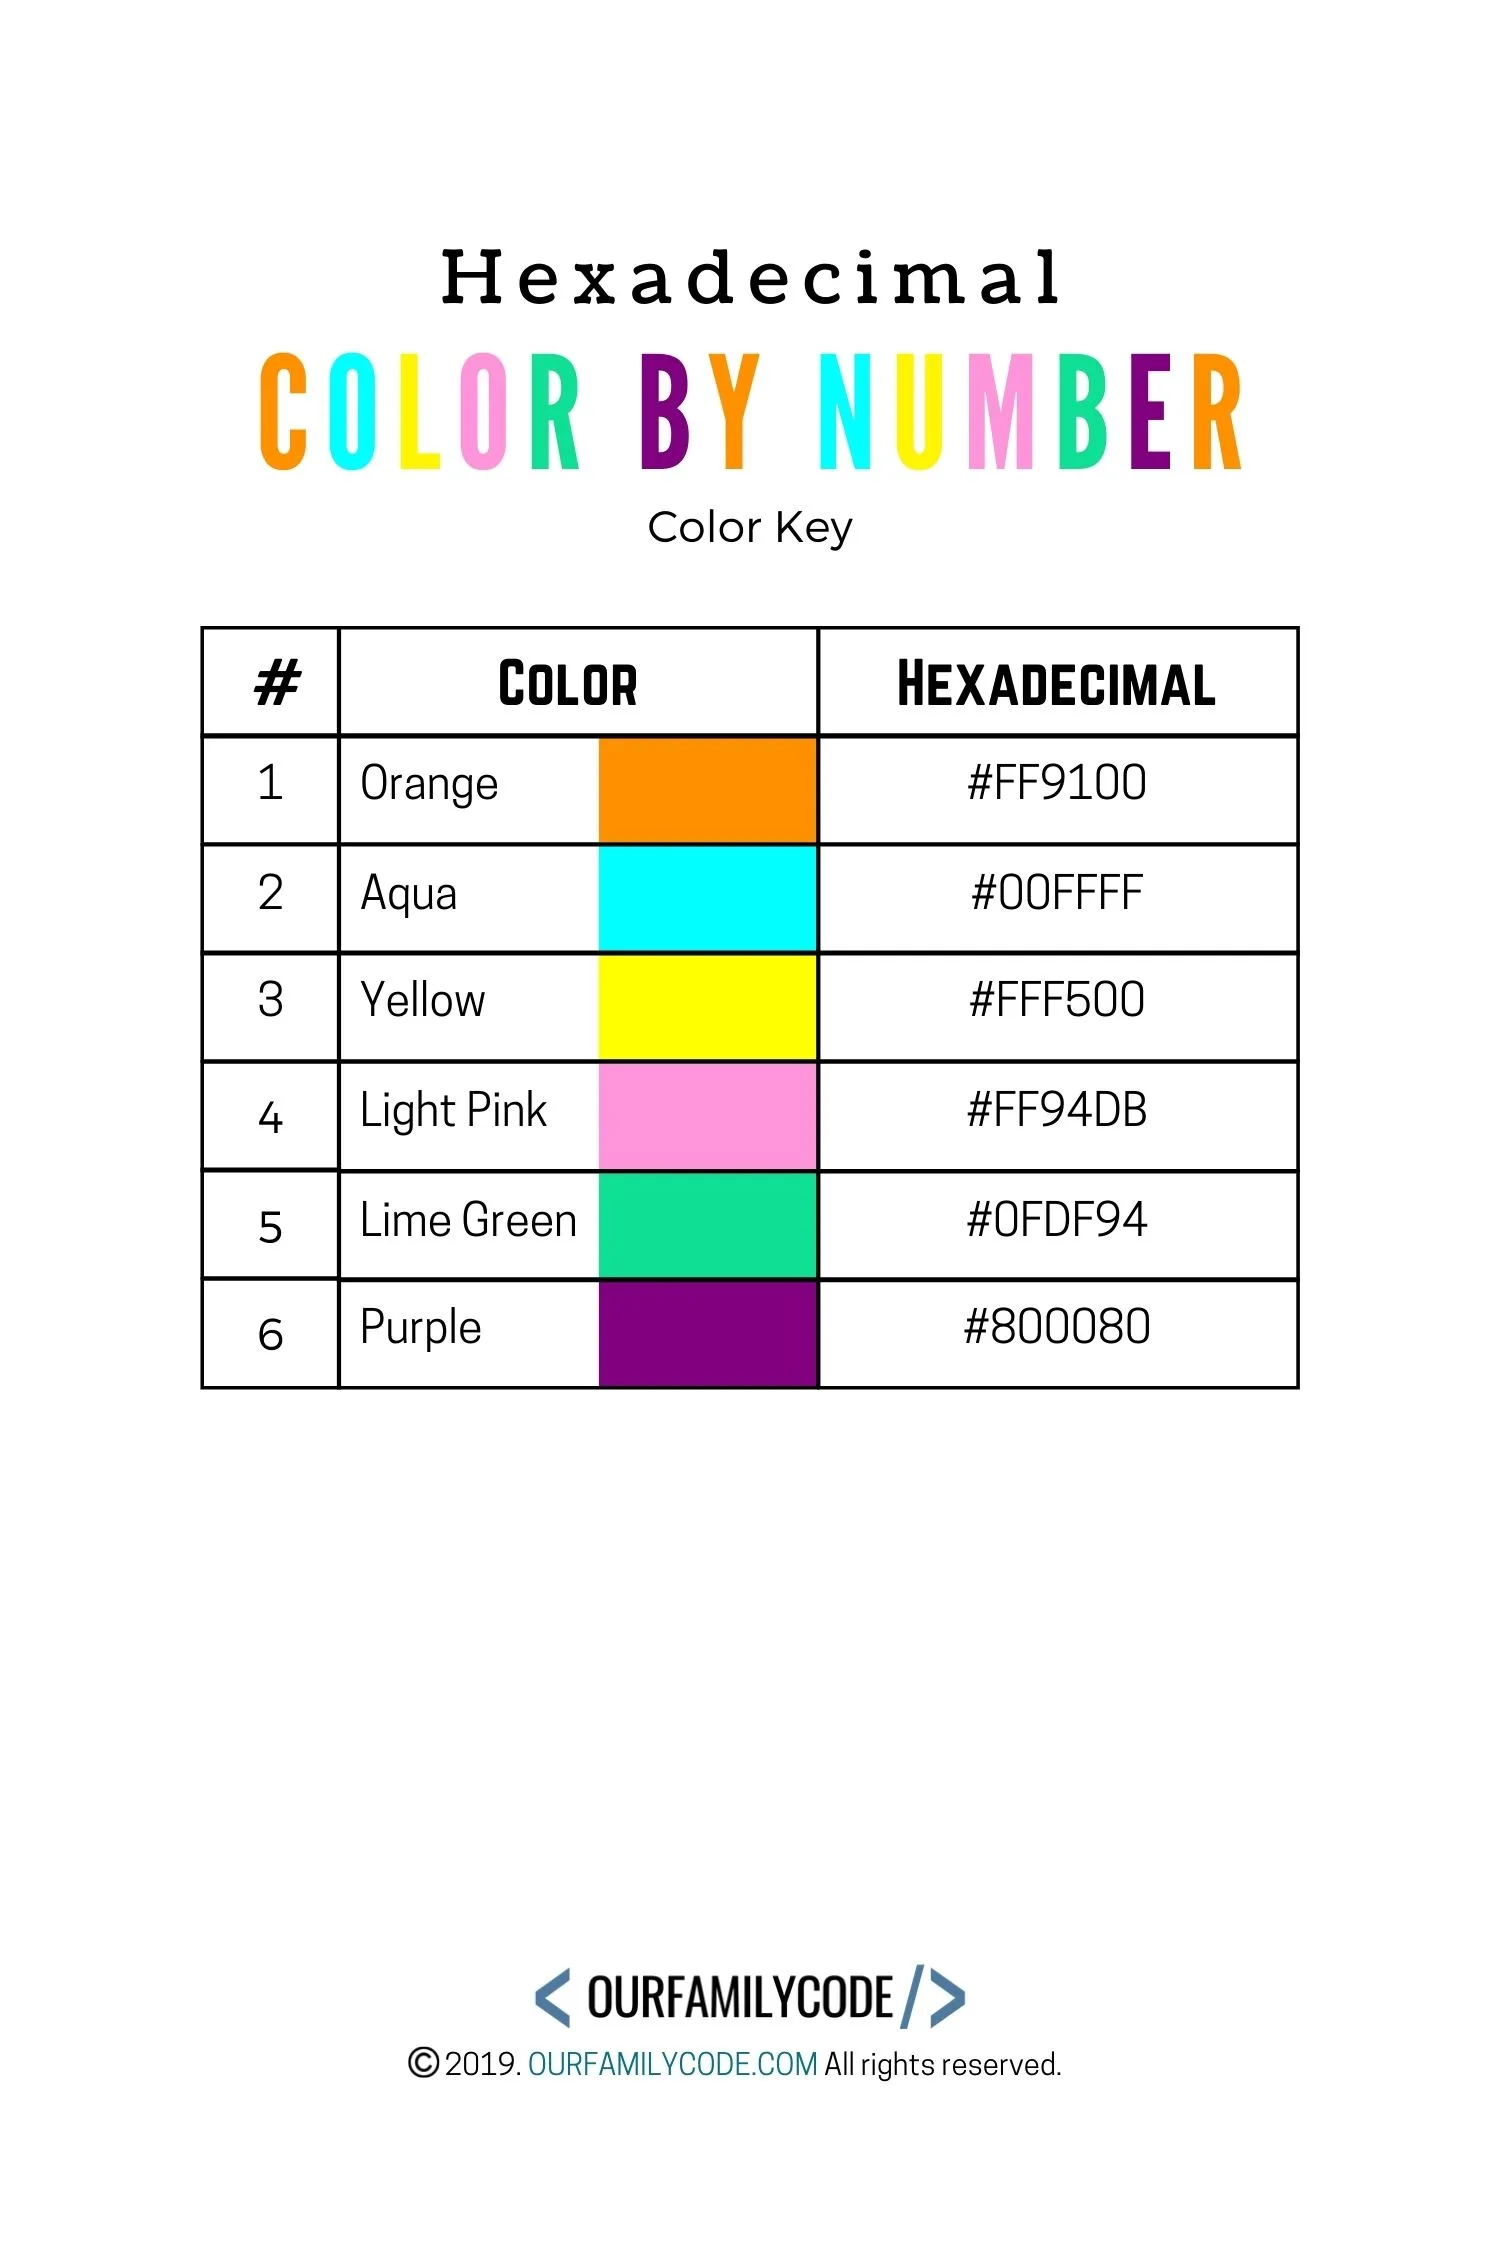 An image of a hexadecimal coloring key to color the Easter Eggs in the activity.